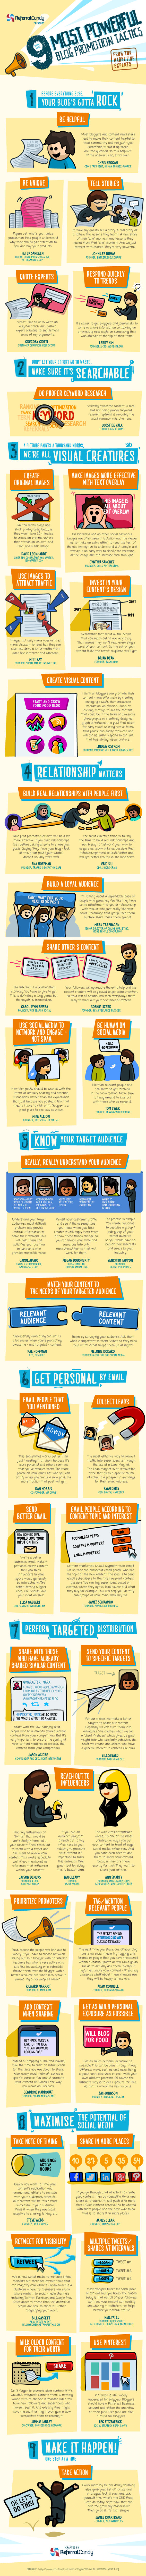 9 Potent Tactics to Promote Your Blog Posts [Infographics]